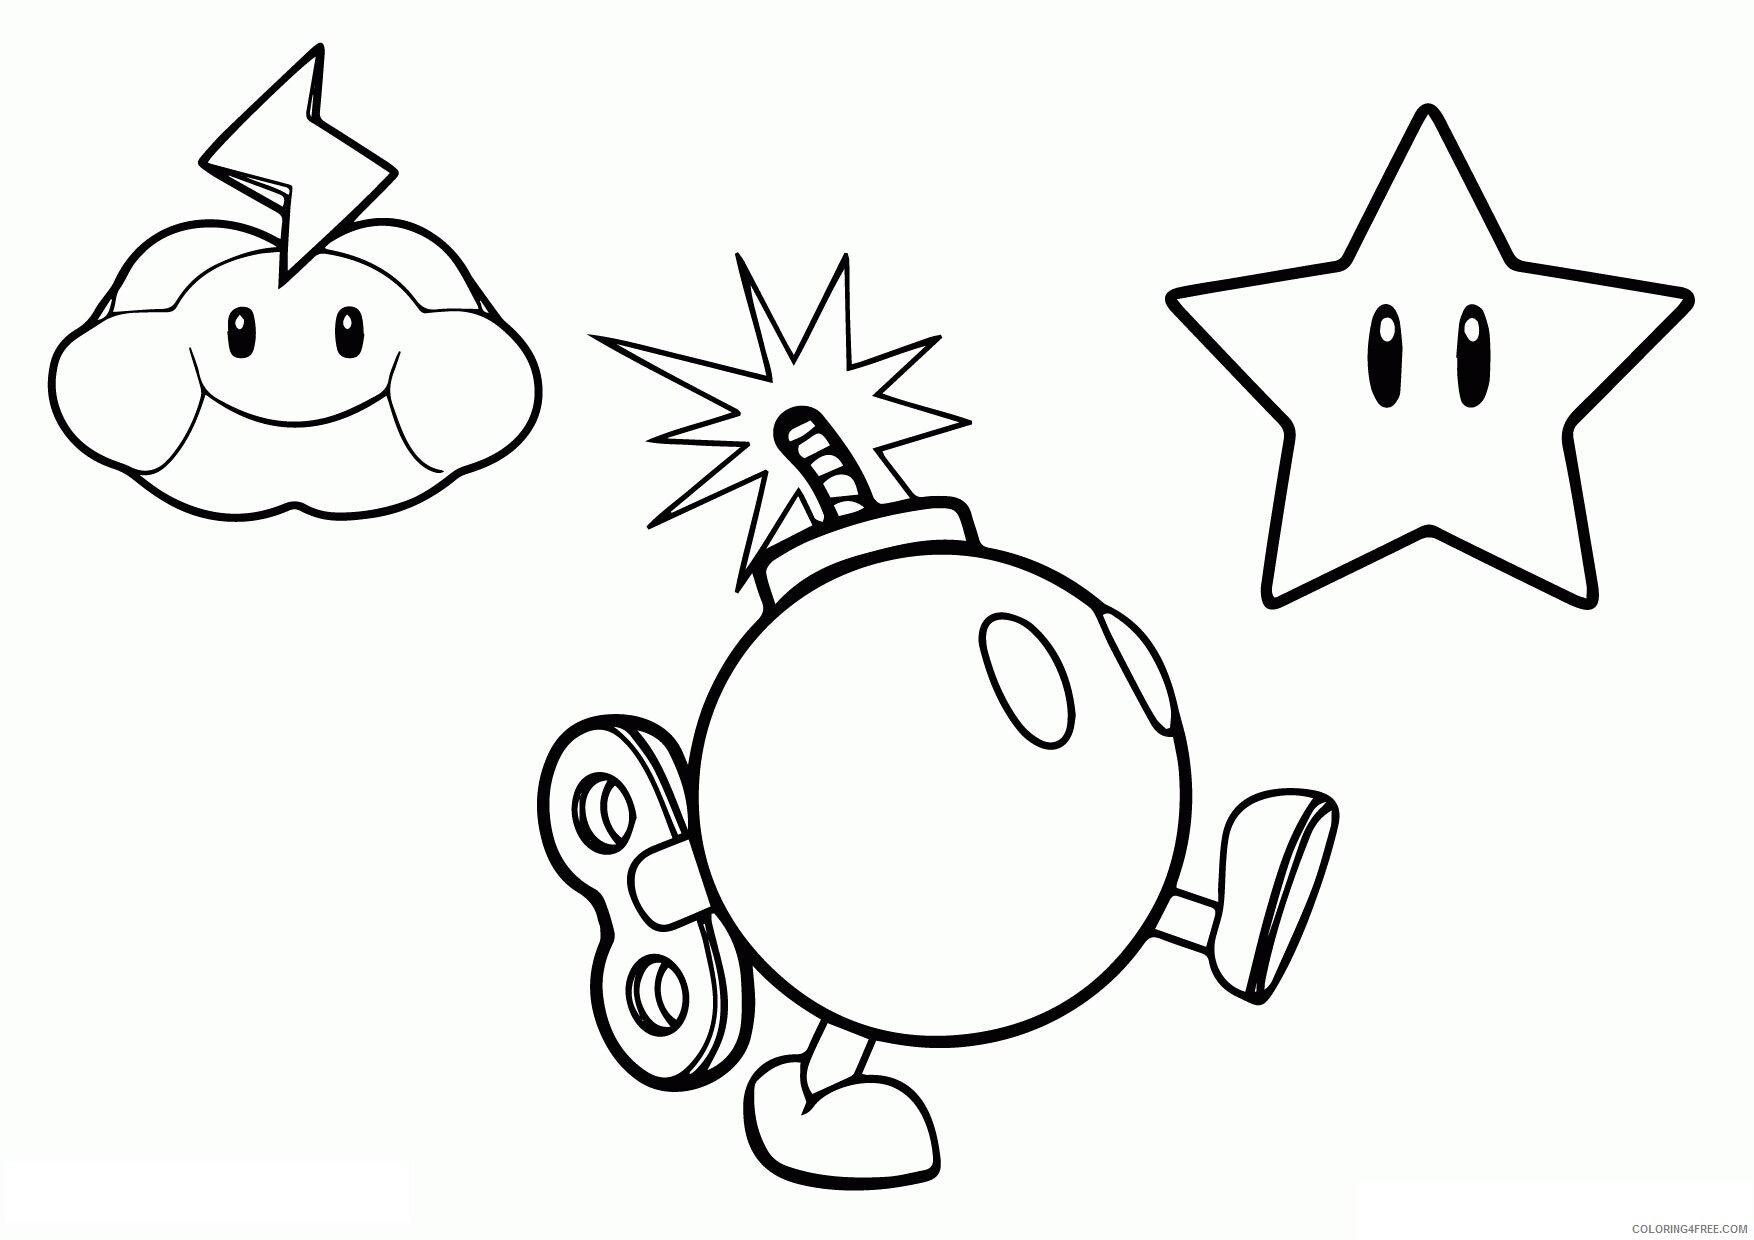 All Mario Character Coloring Pages Printable Sheets Super Mario Characters Page 2021 a 4168 Coloring4free